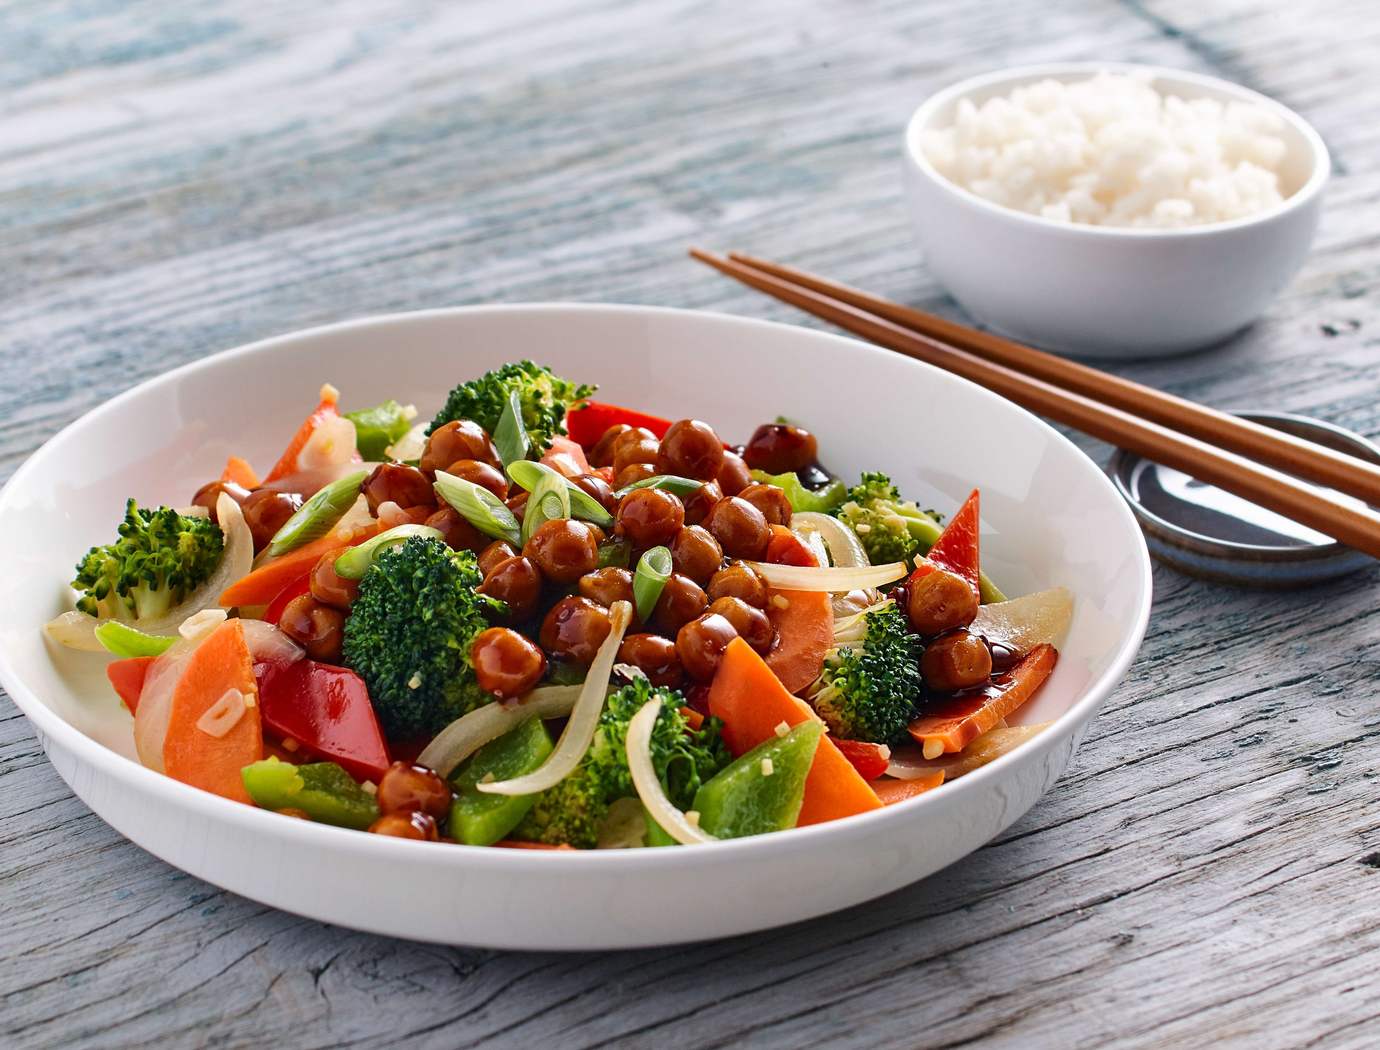 Chickpea and vegetable stir-fry with General Tao honey sauce